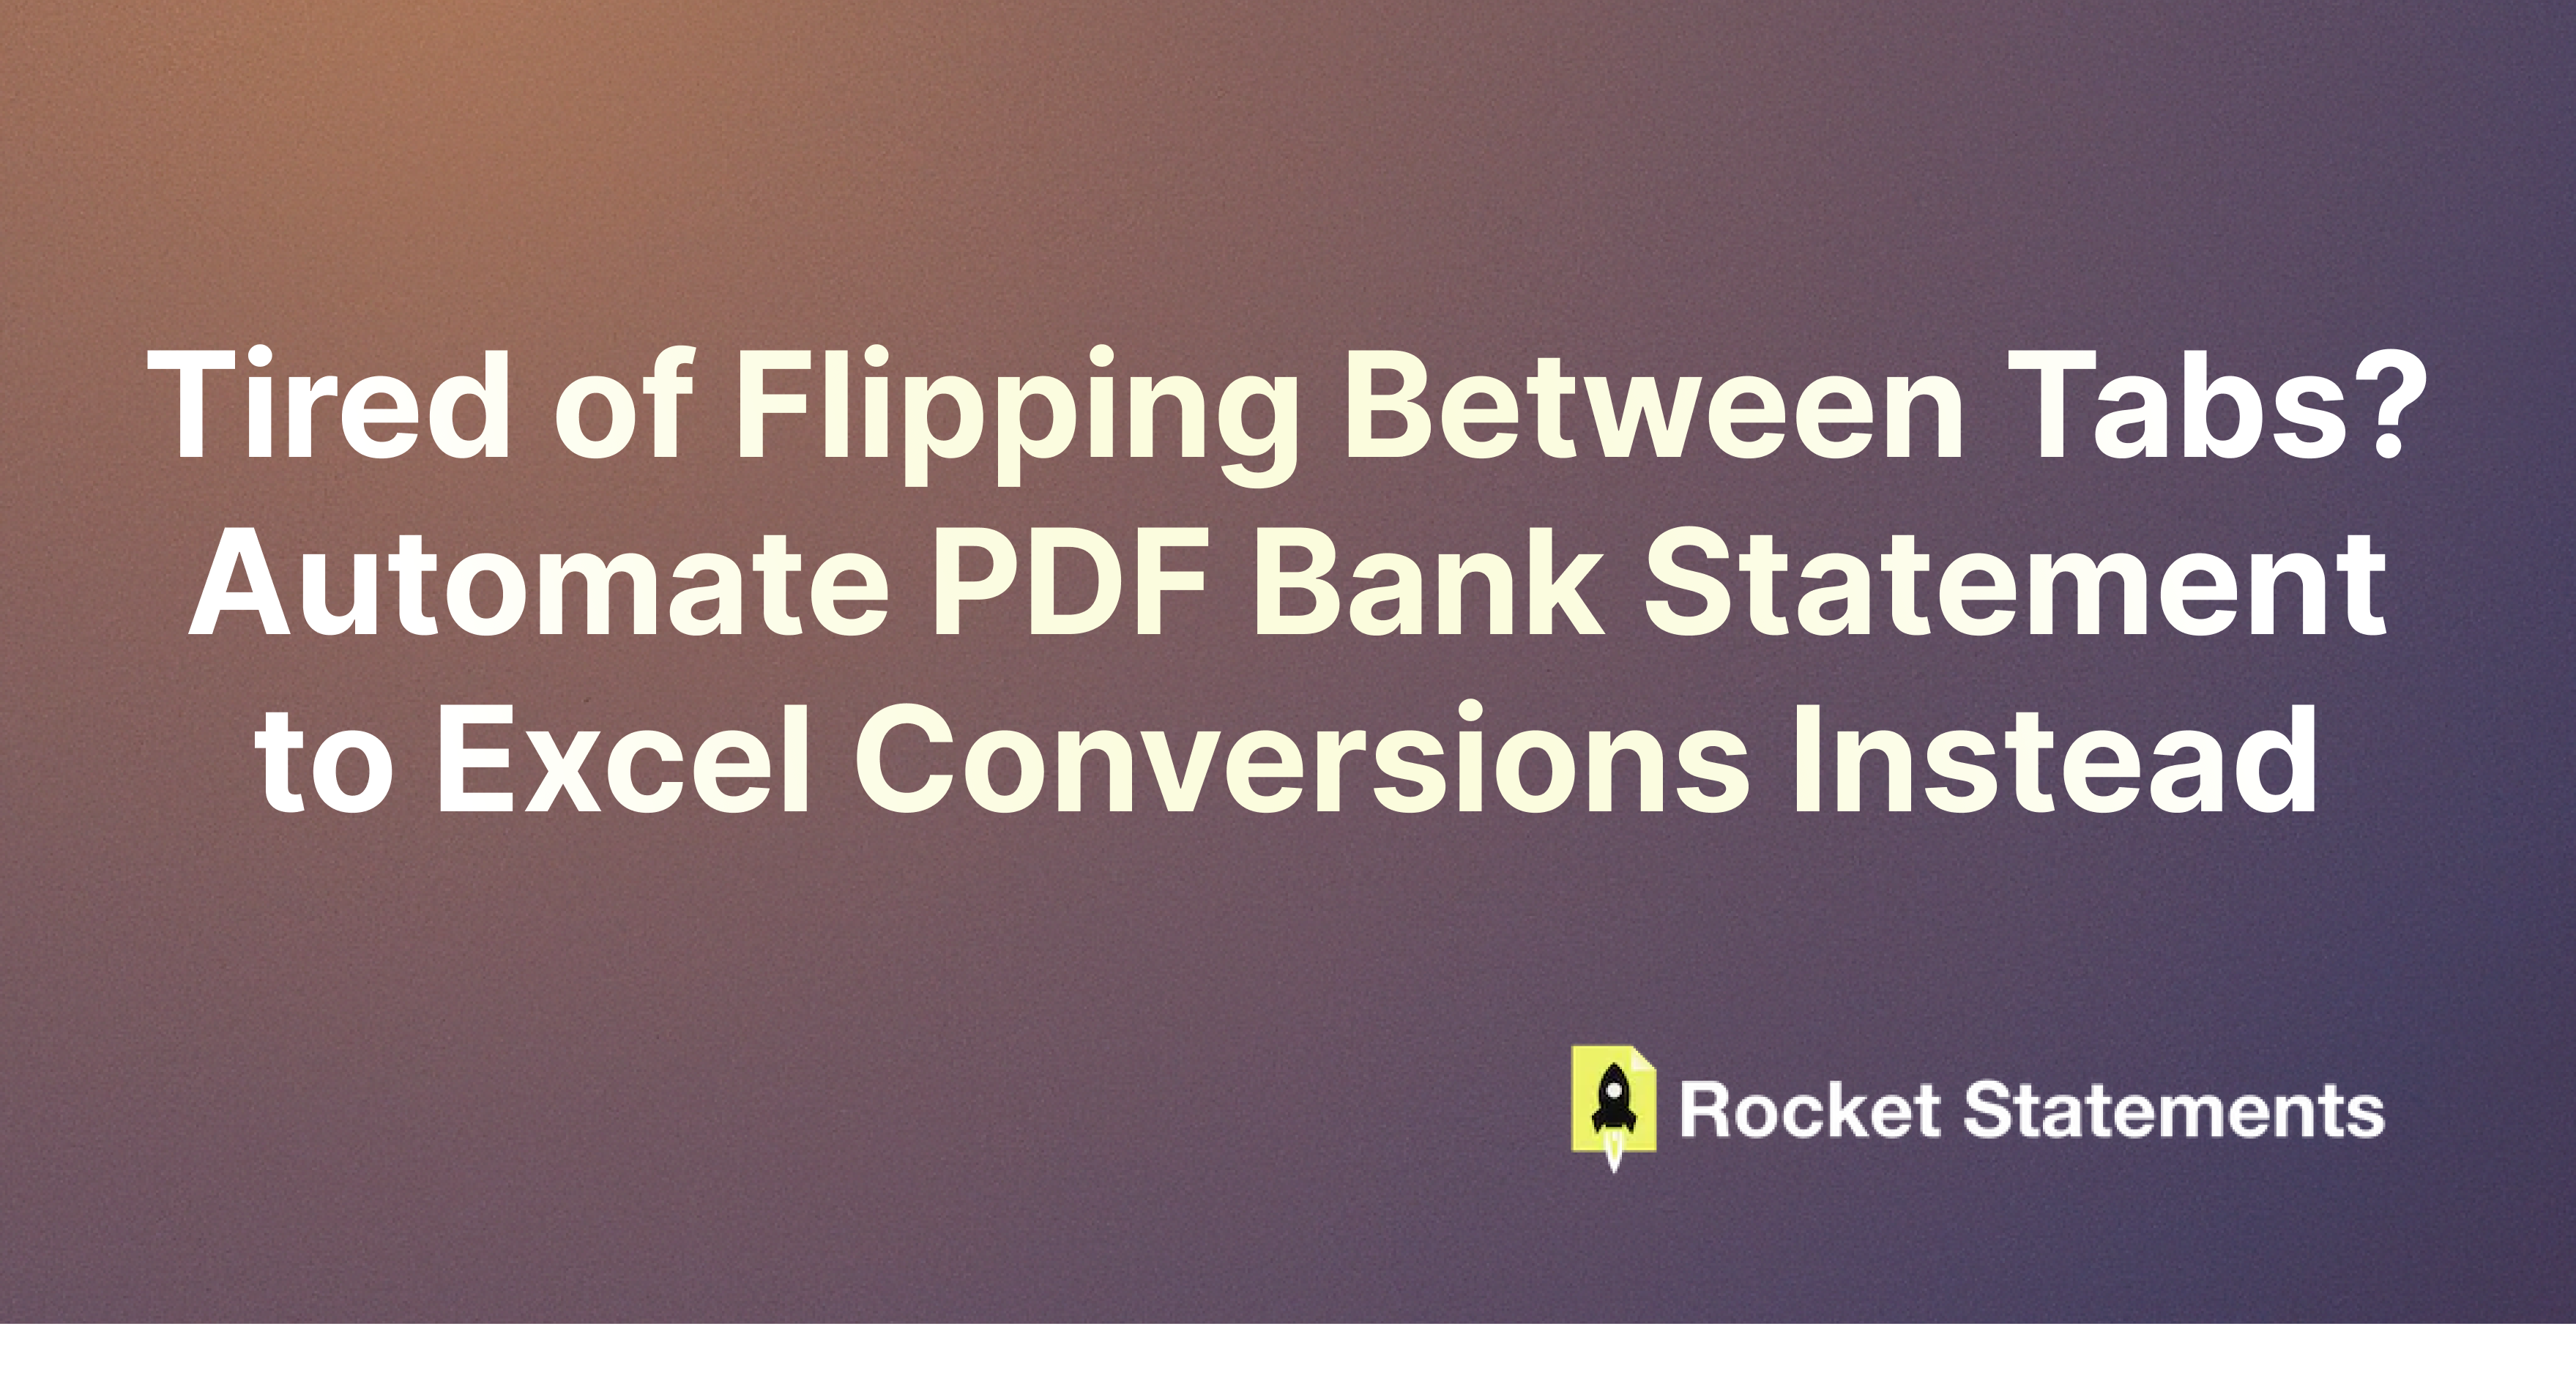 Tired of Flipping Between Tabs? Automate PDF Bank Statement to Excel Conversions Instead